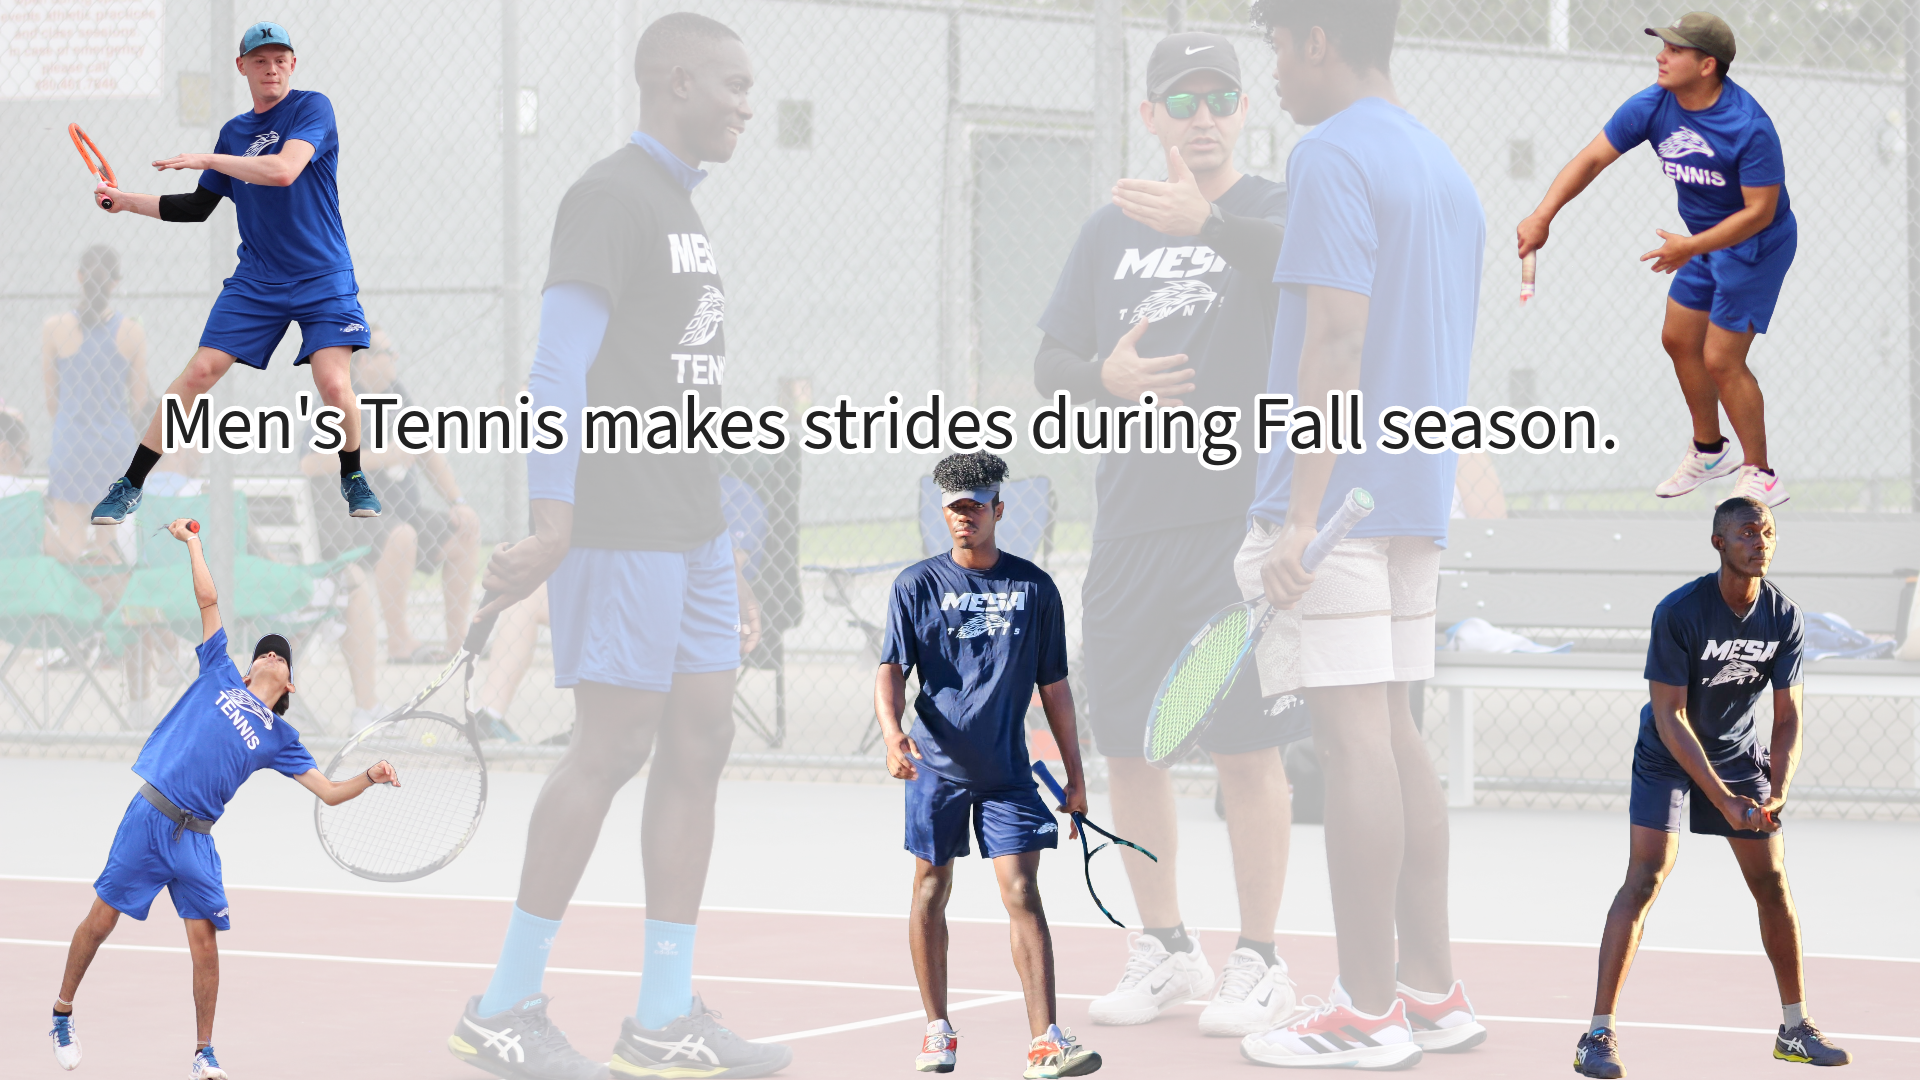 Men's Tennis competing well during fall season